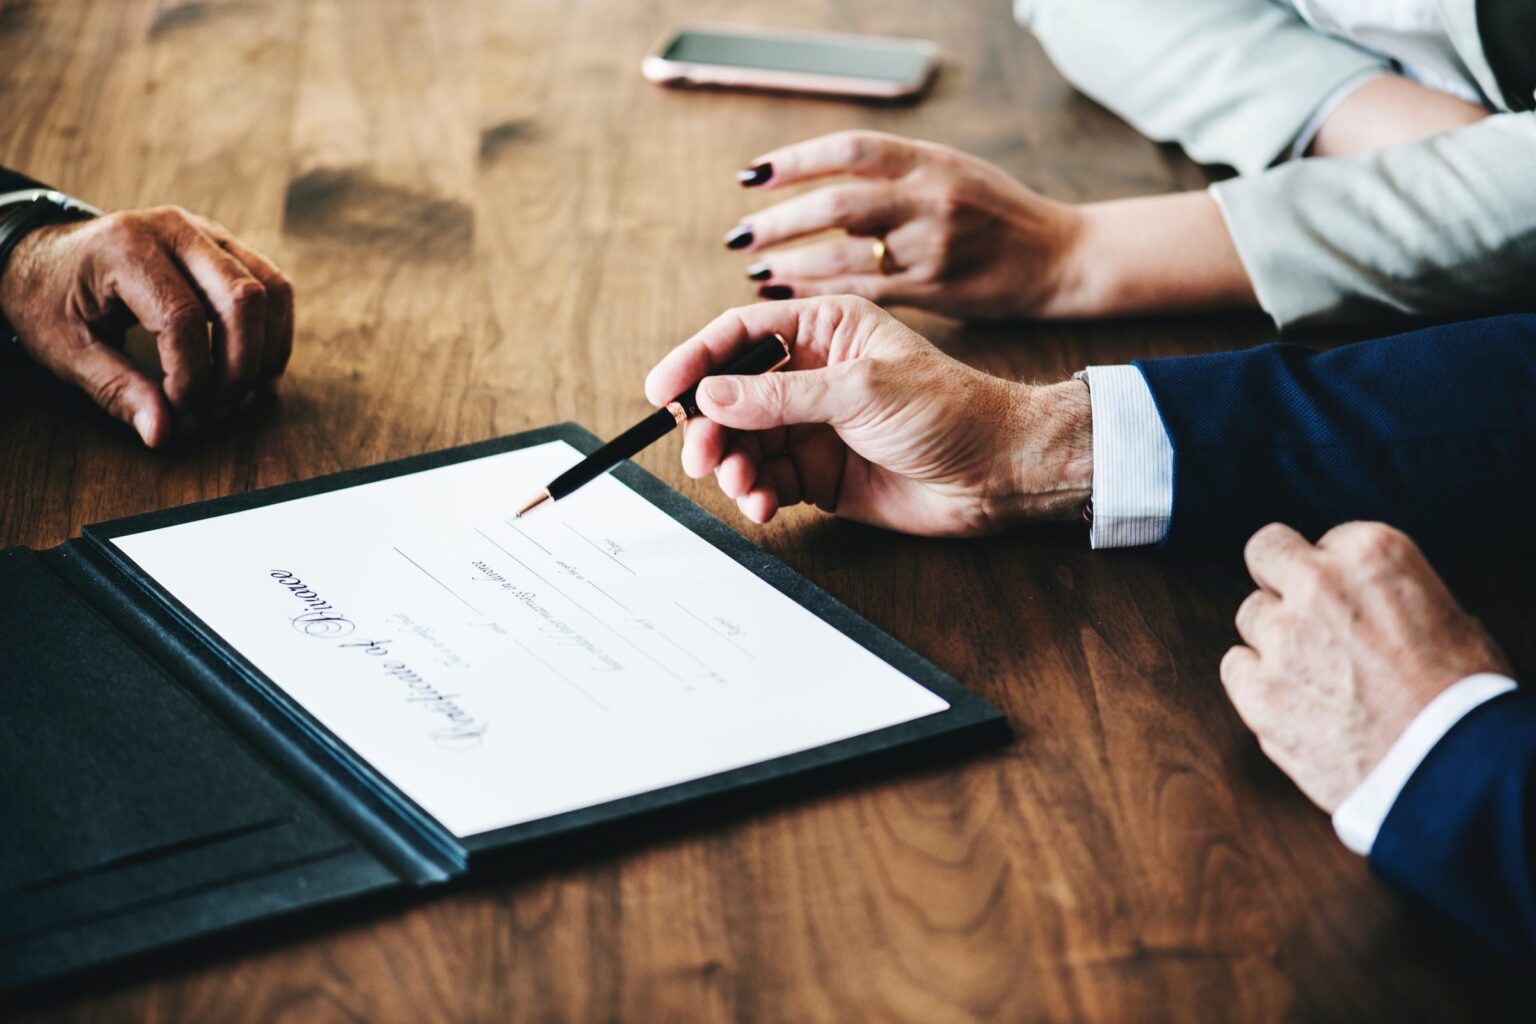 Probate is essential for transferring property ownership to the beneficiaries and takes care of other aspects. Learn more about a probate attorney here.